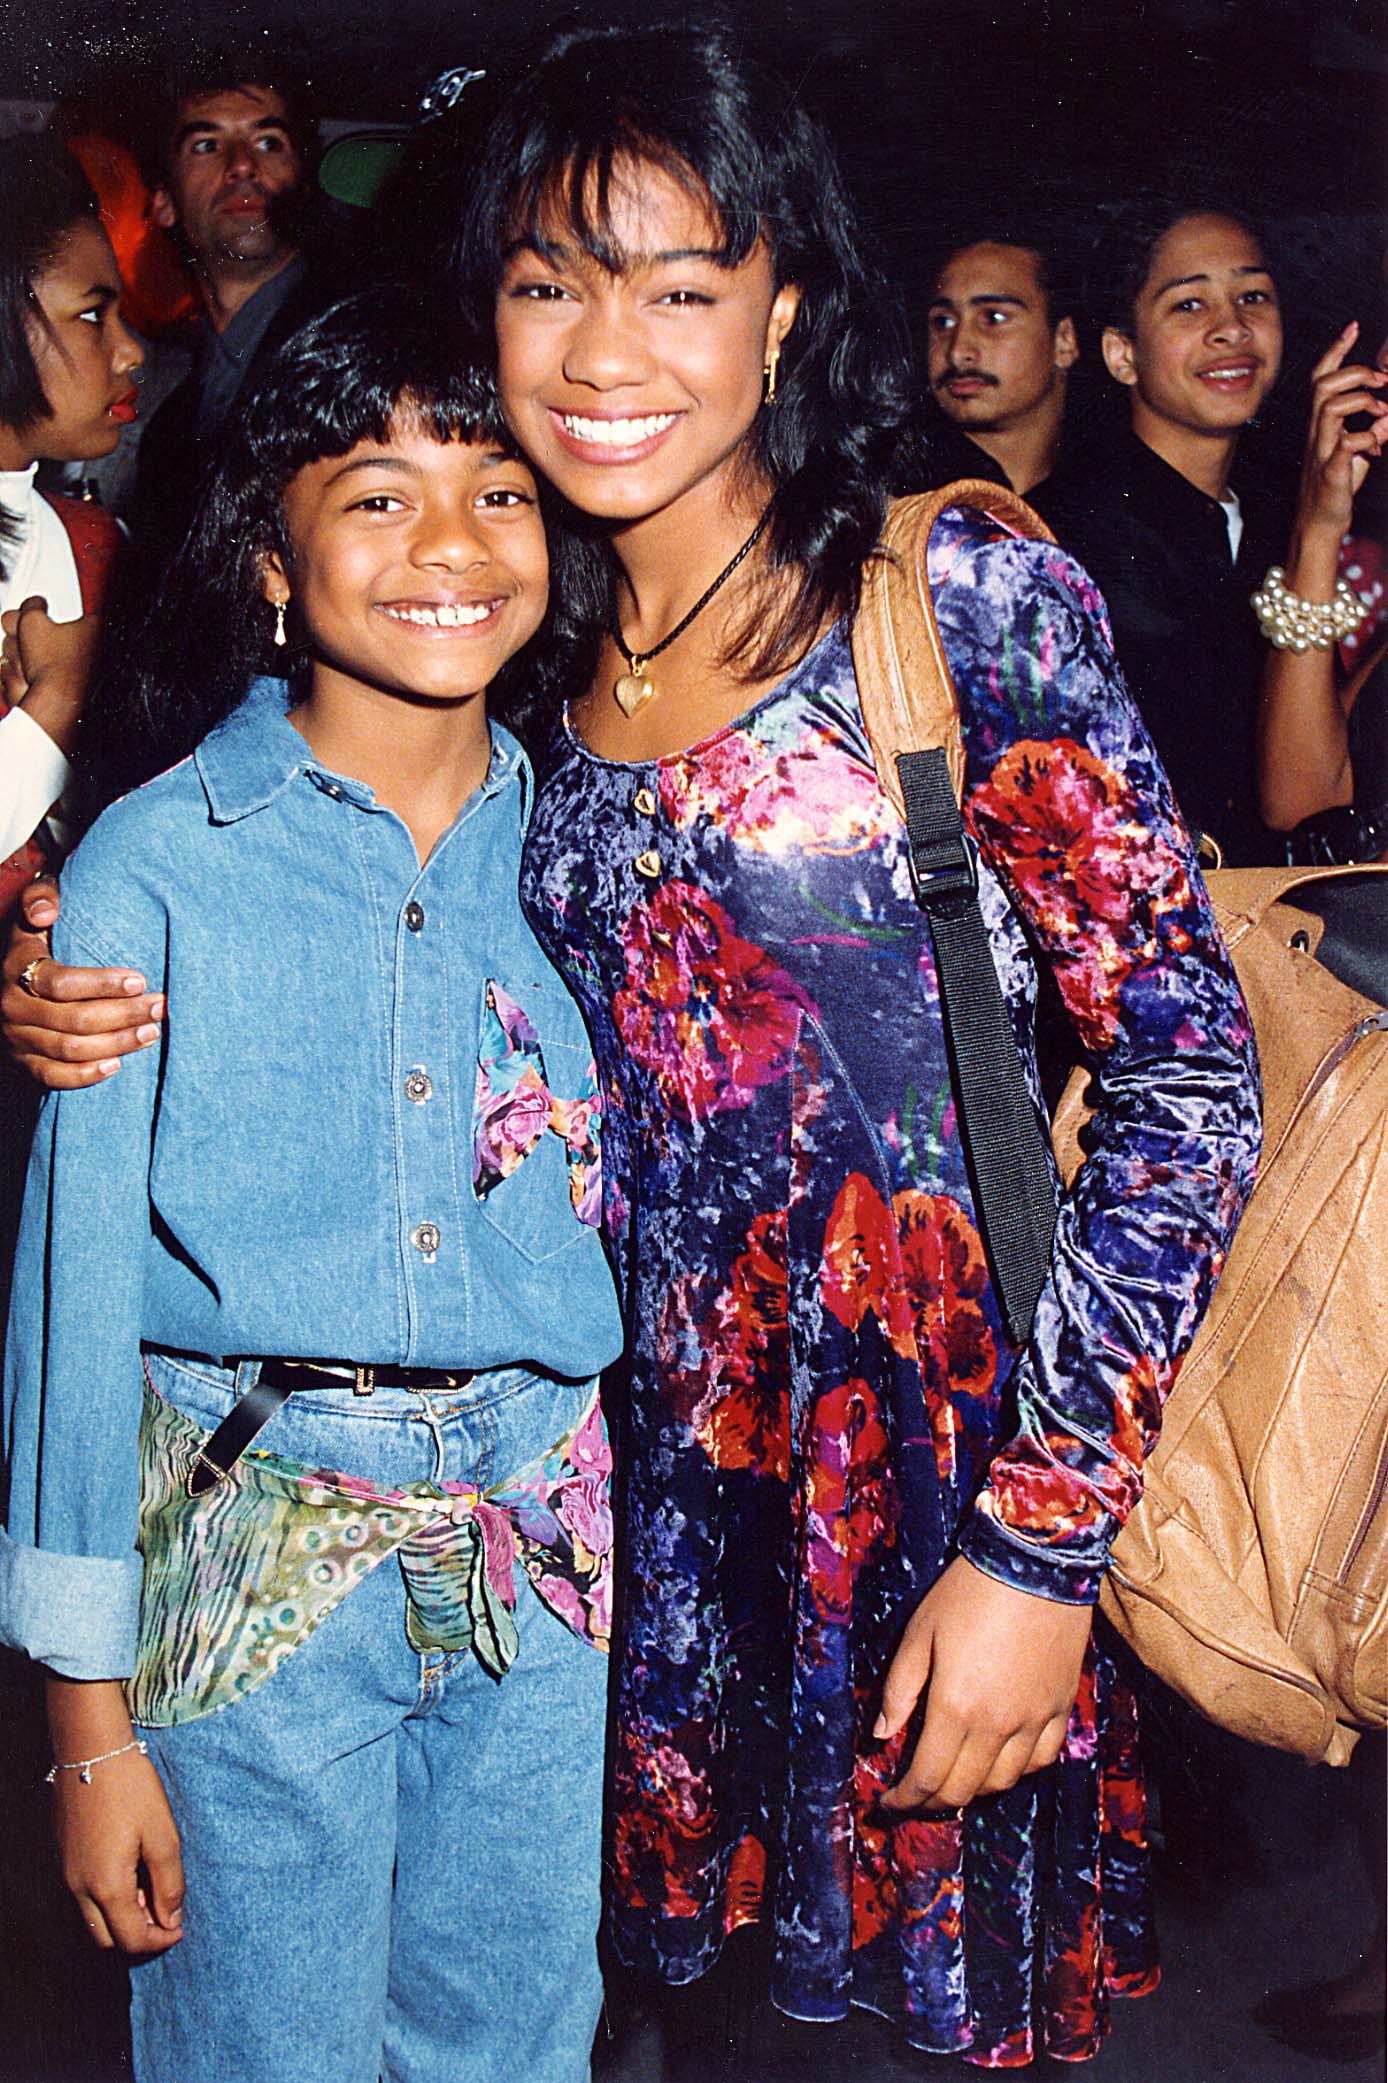 Kimberly Ali and Tatyana Ali during the 1993 Kids' Choice Awards on September 7, 1993, in Los Angeles, California, United States. | Source: Getty Images